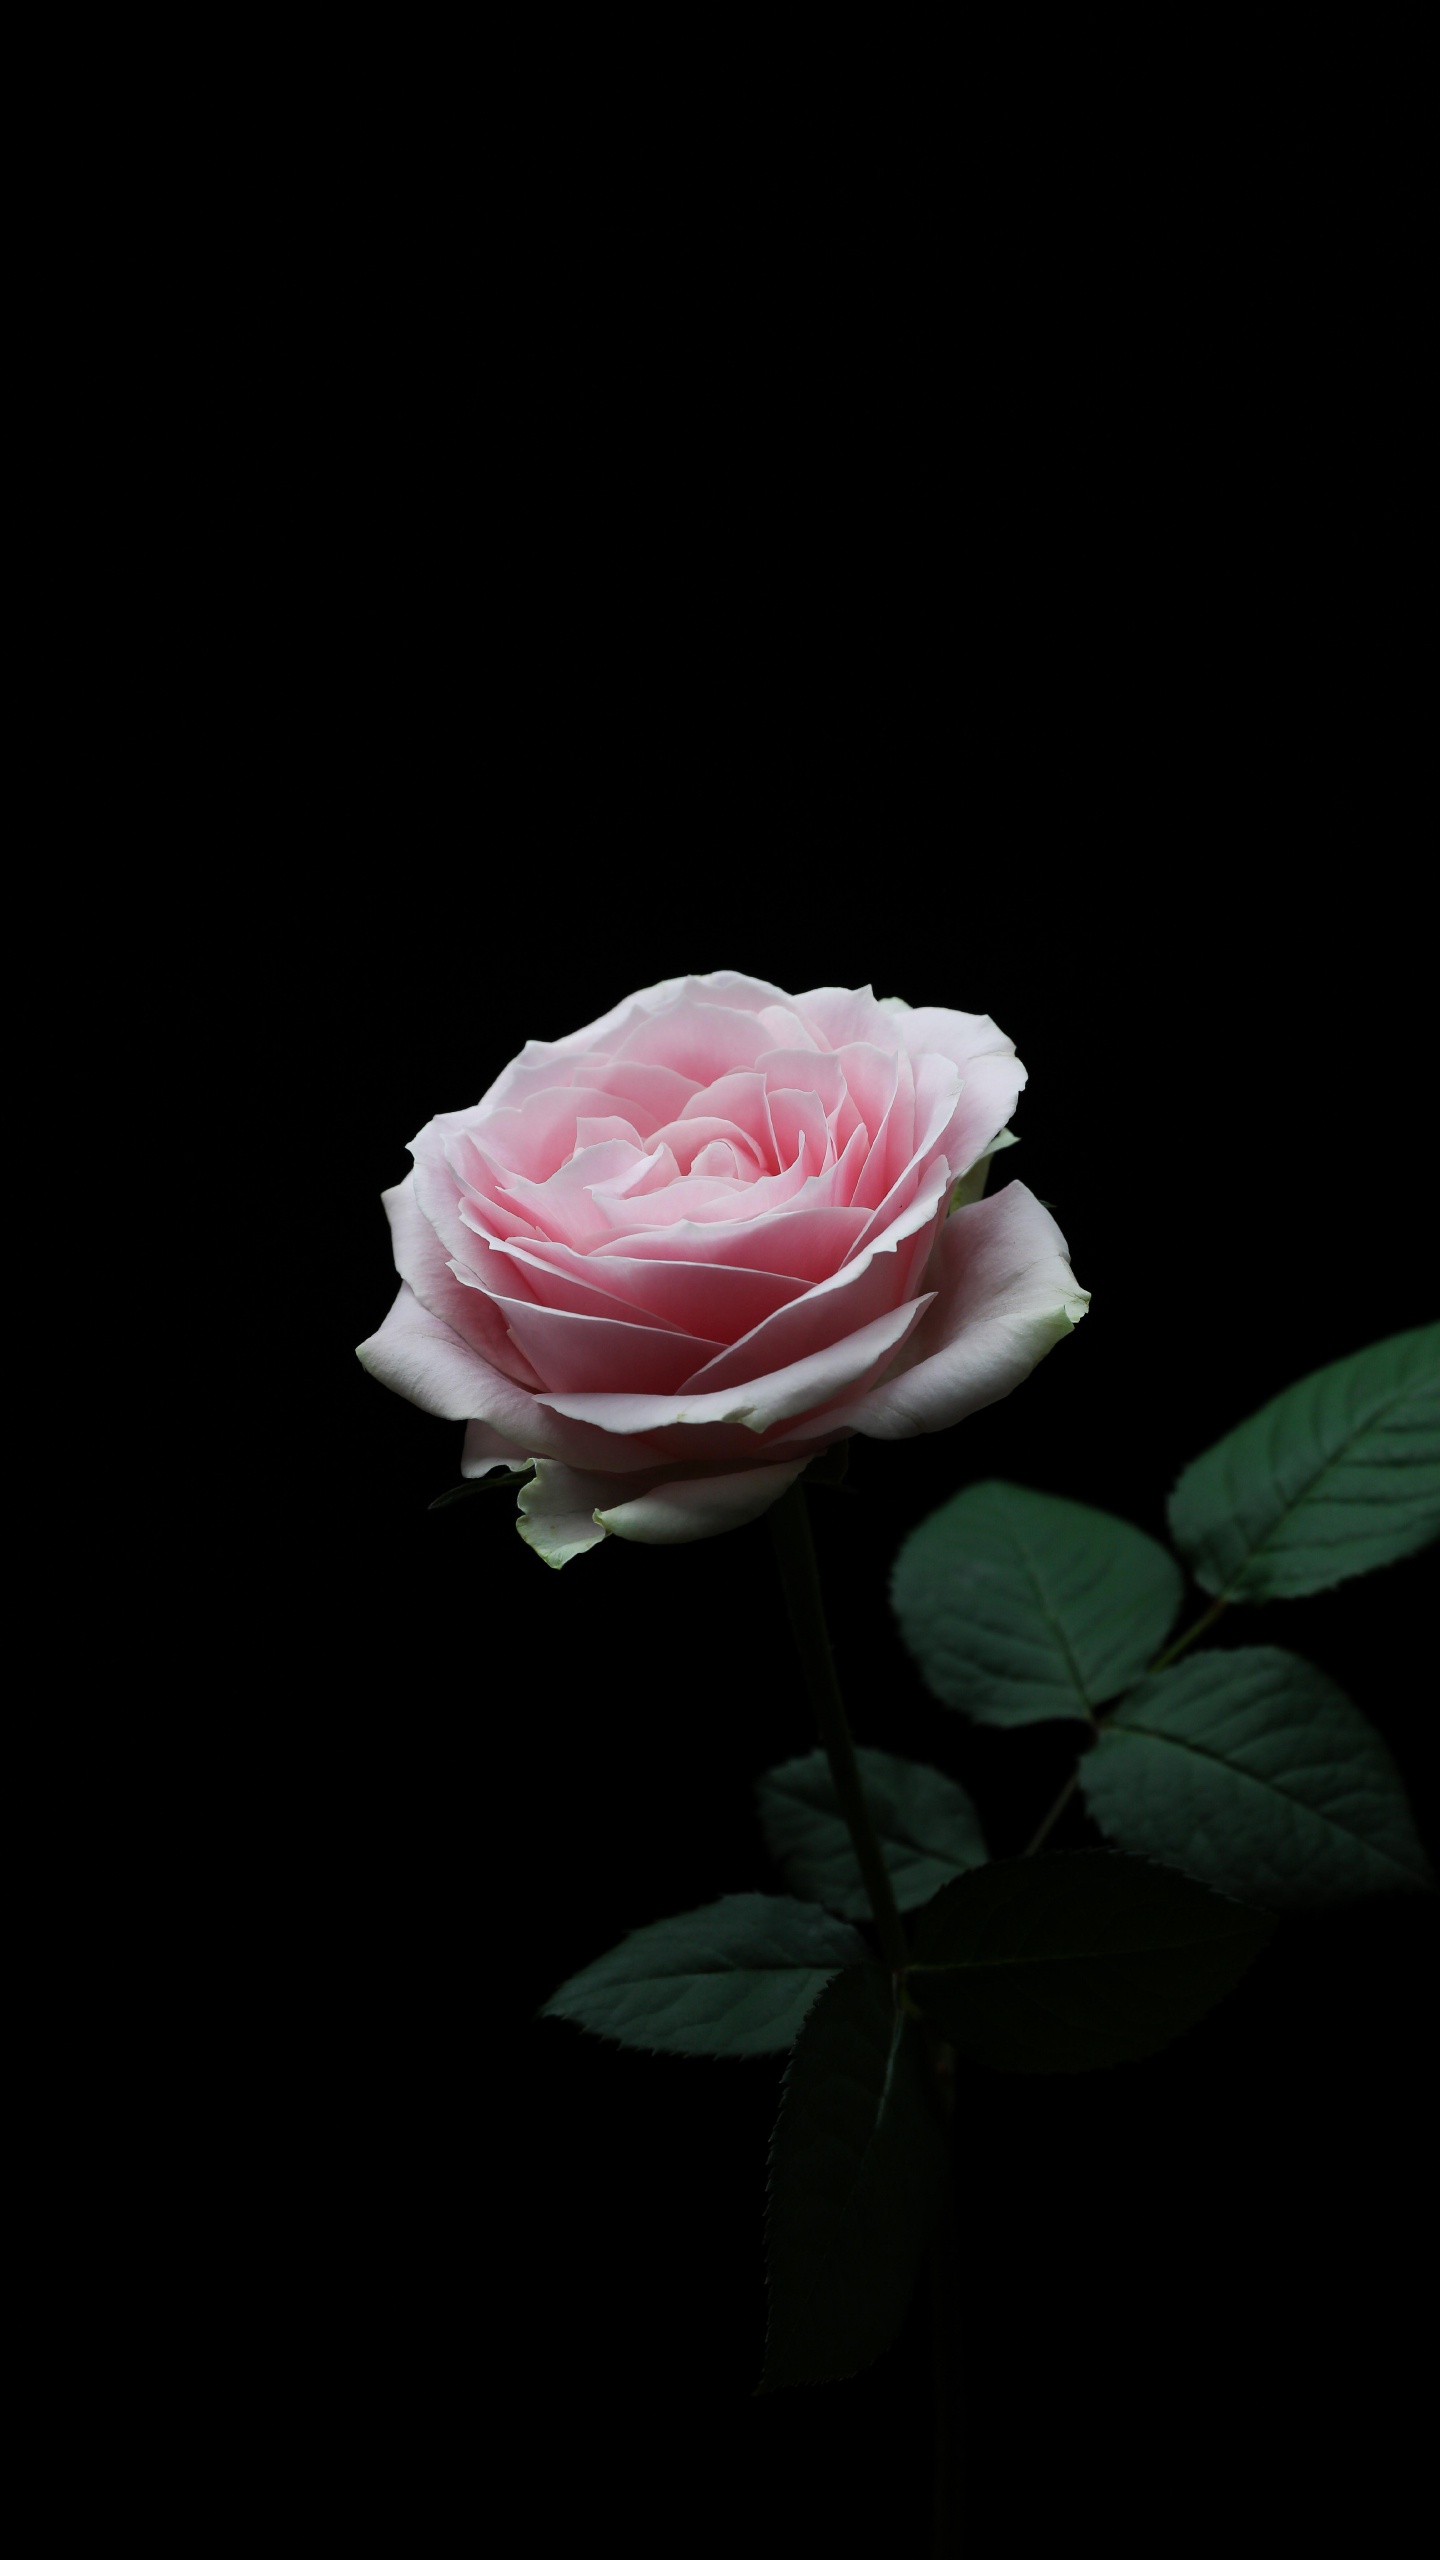 Pink Rose in Bloom With Black Background. Wallpaper in 1440x2560 Resolution